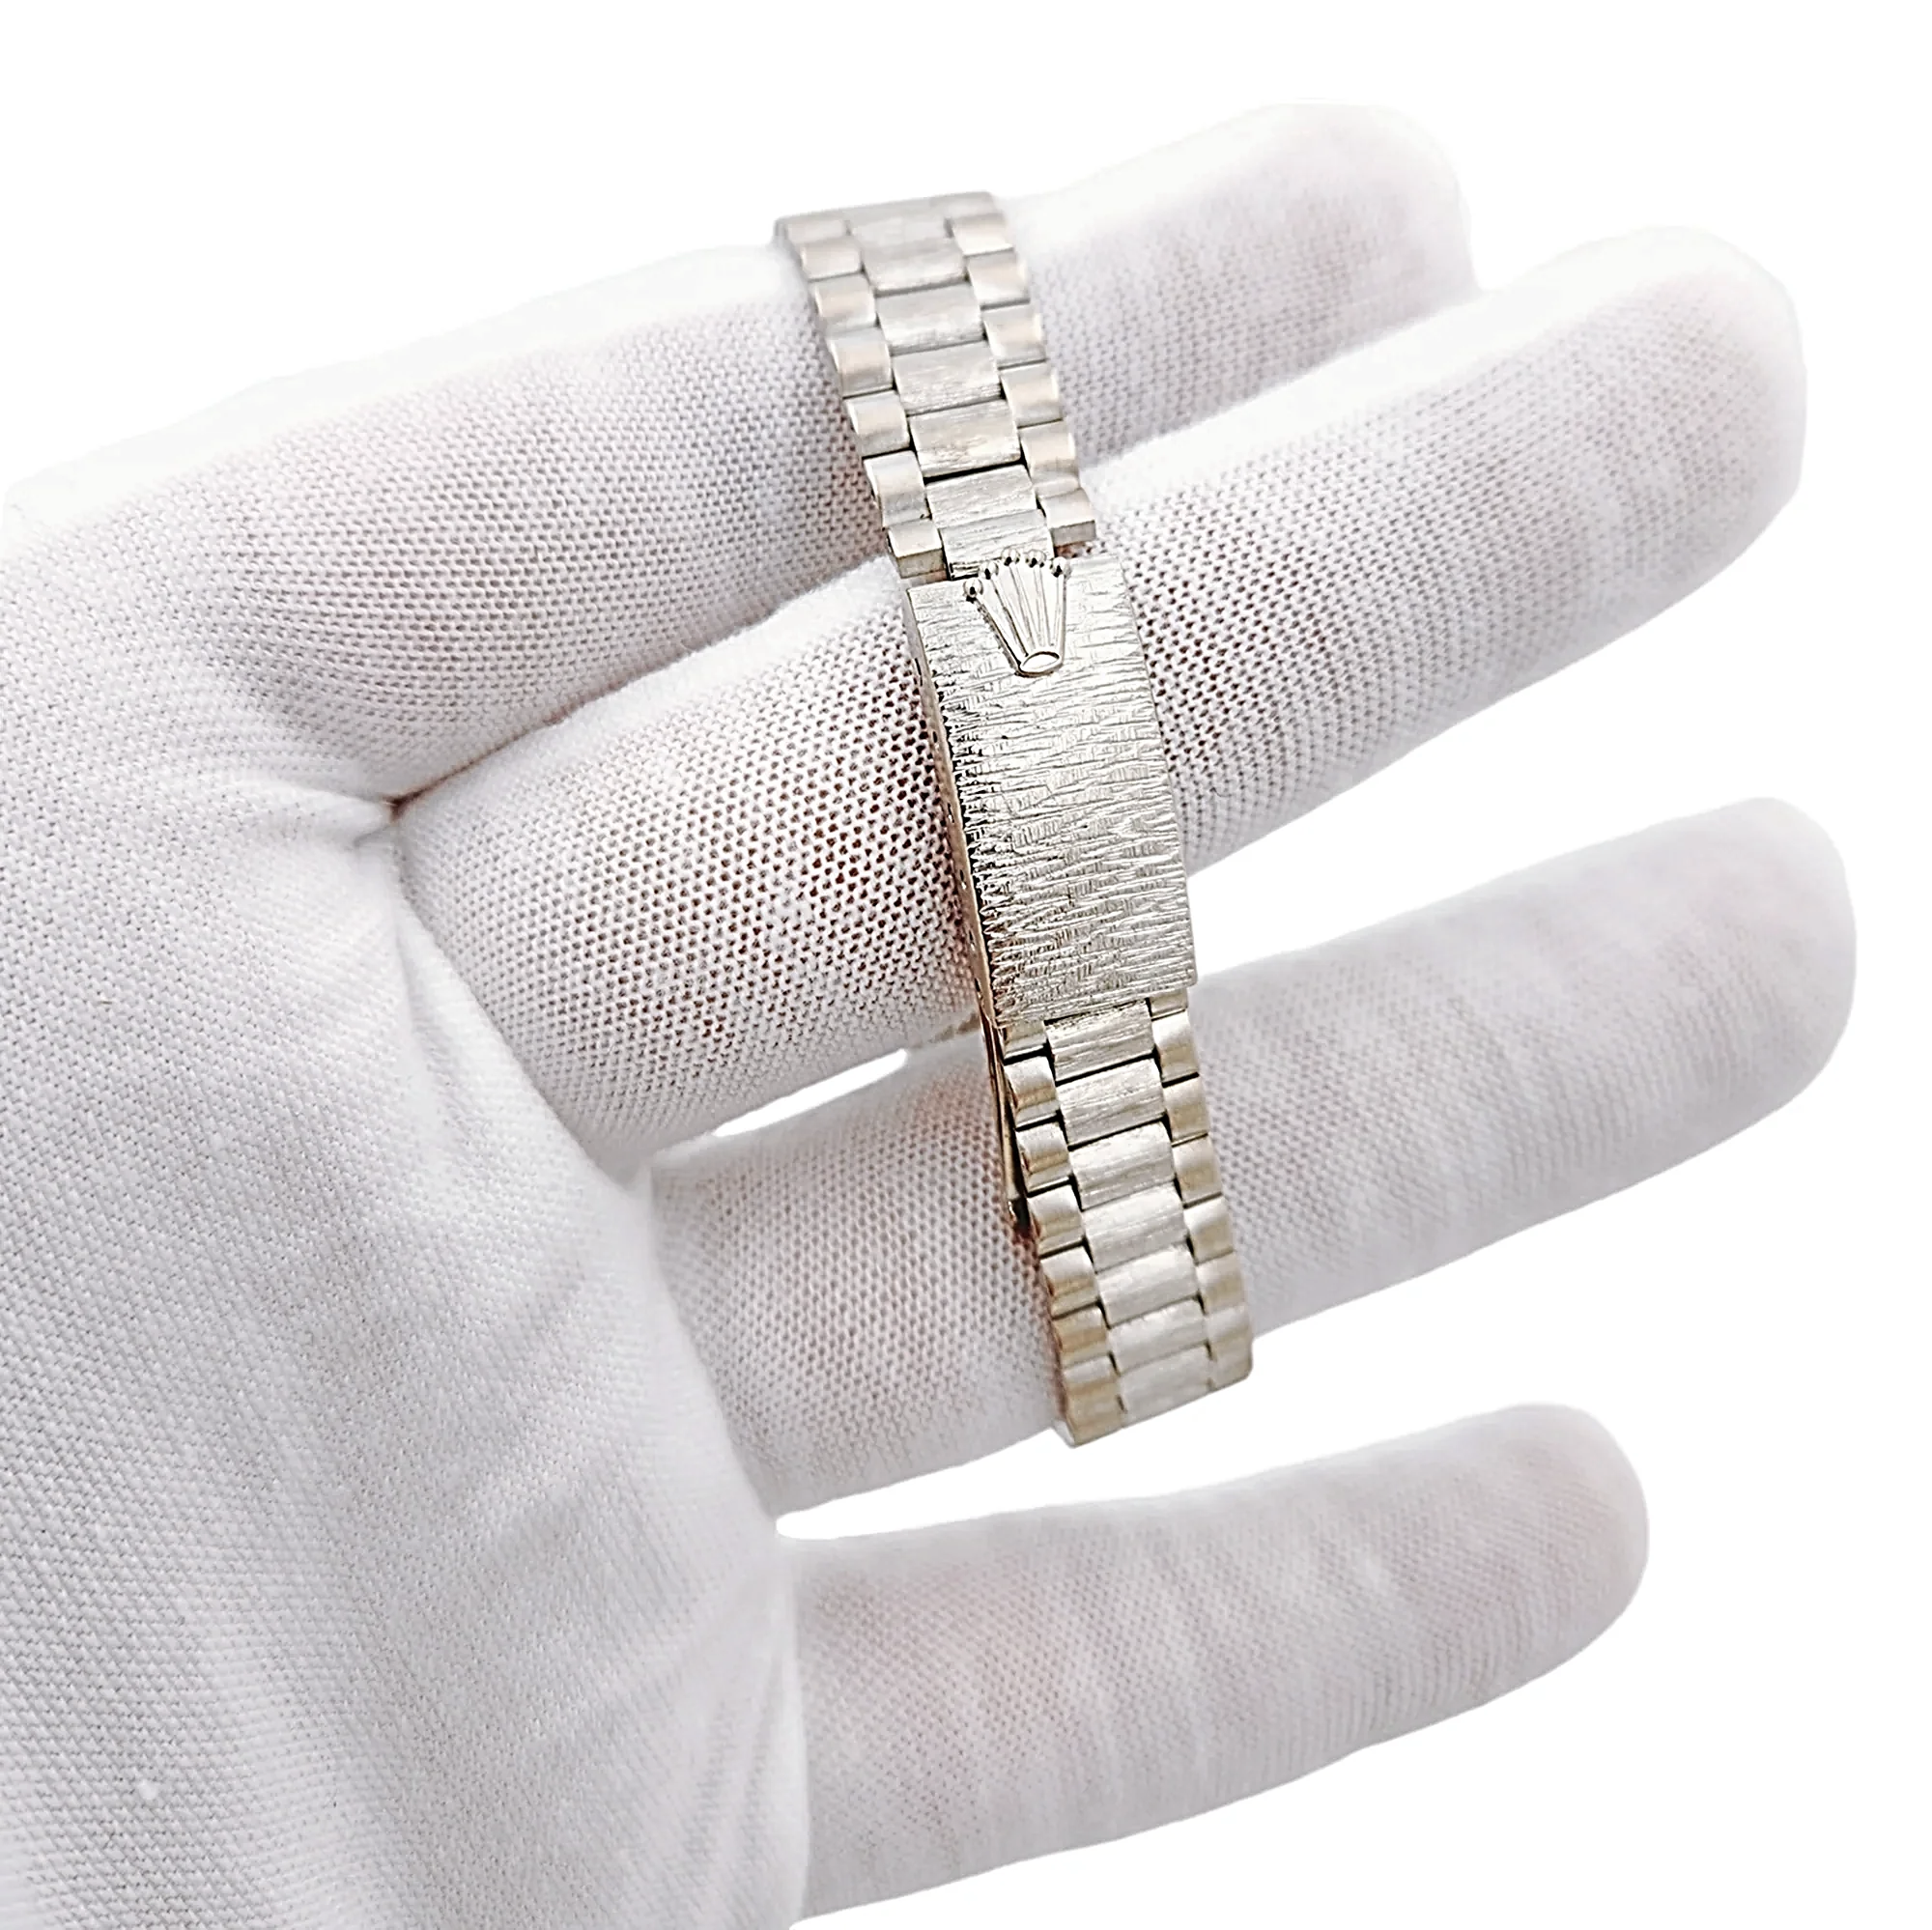 1967 Ladies Rolex 24mm Vintage Bark Finish Solid 18K White Gold Wristwatch w/ Mother of Pearl Diamond Dial. (Pre-Owned 6517)